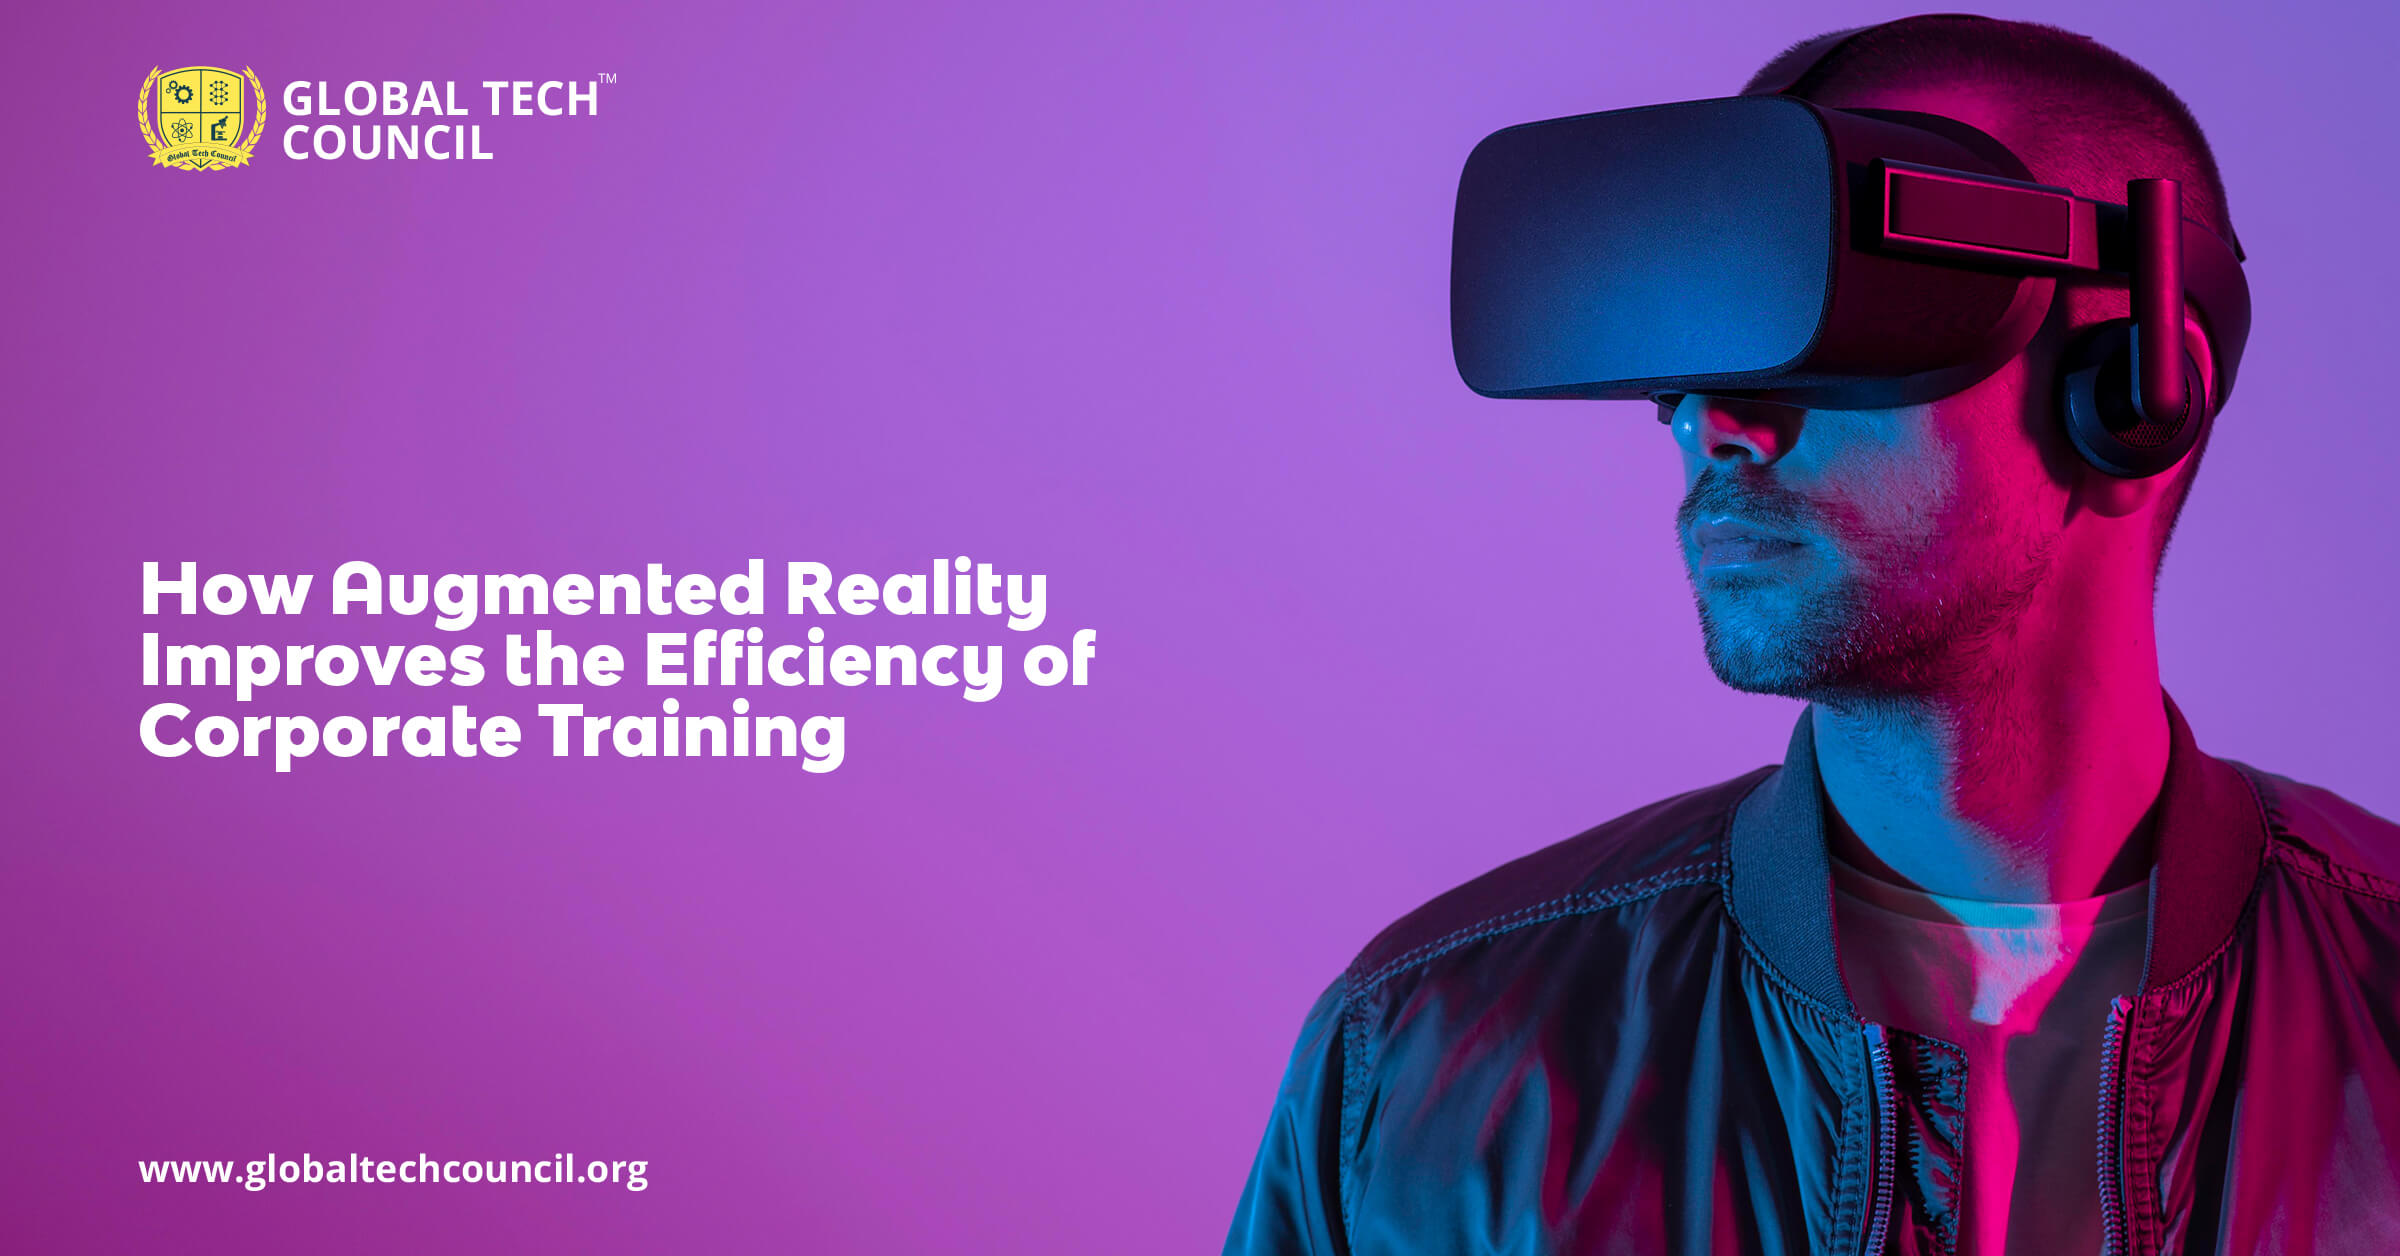 How Augmented Reality Improves the Efficiency of Corporate Training